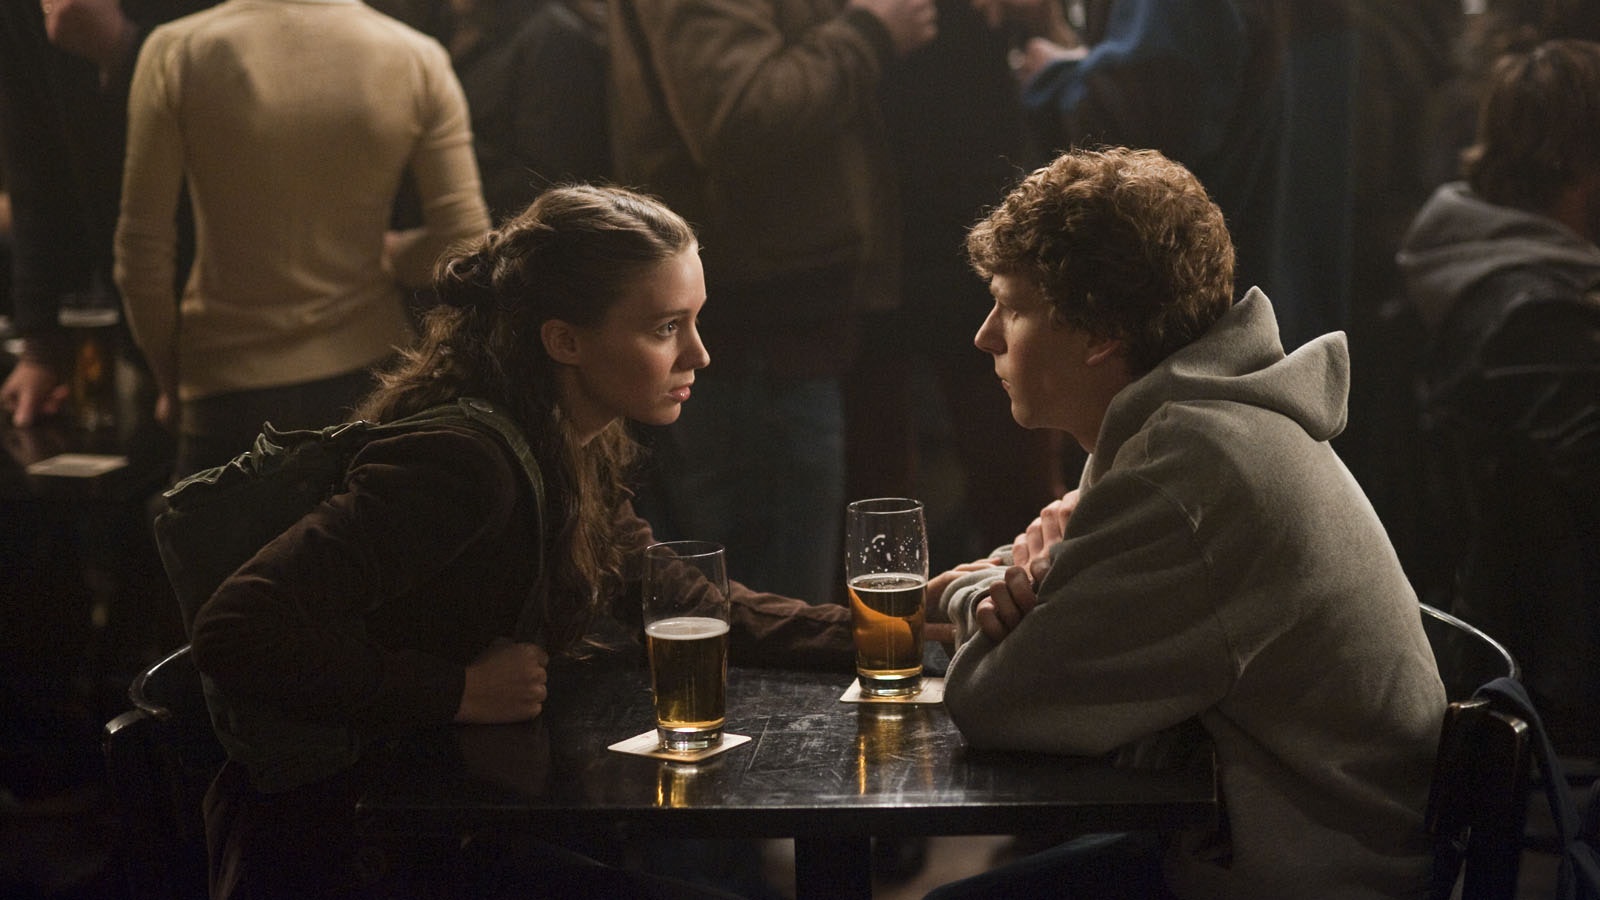 Rooney Mara, left, and Jesse Eisenberg in Columbia Pictures' "The Social Network."